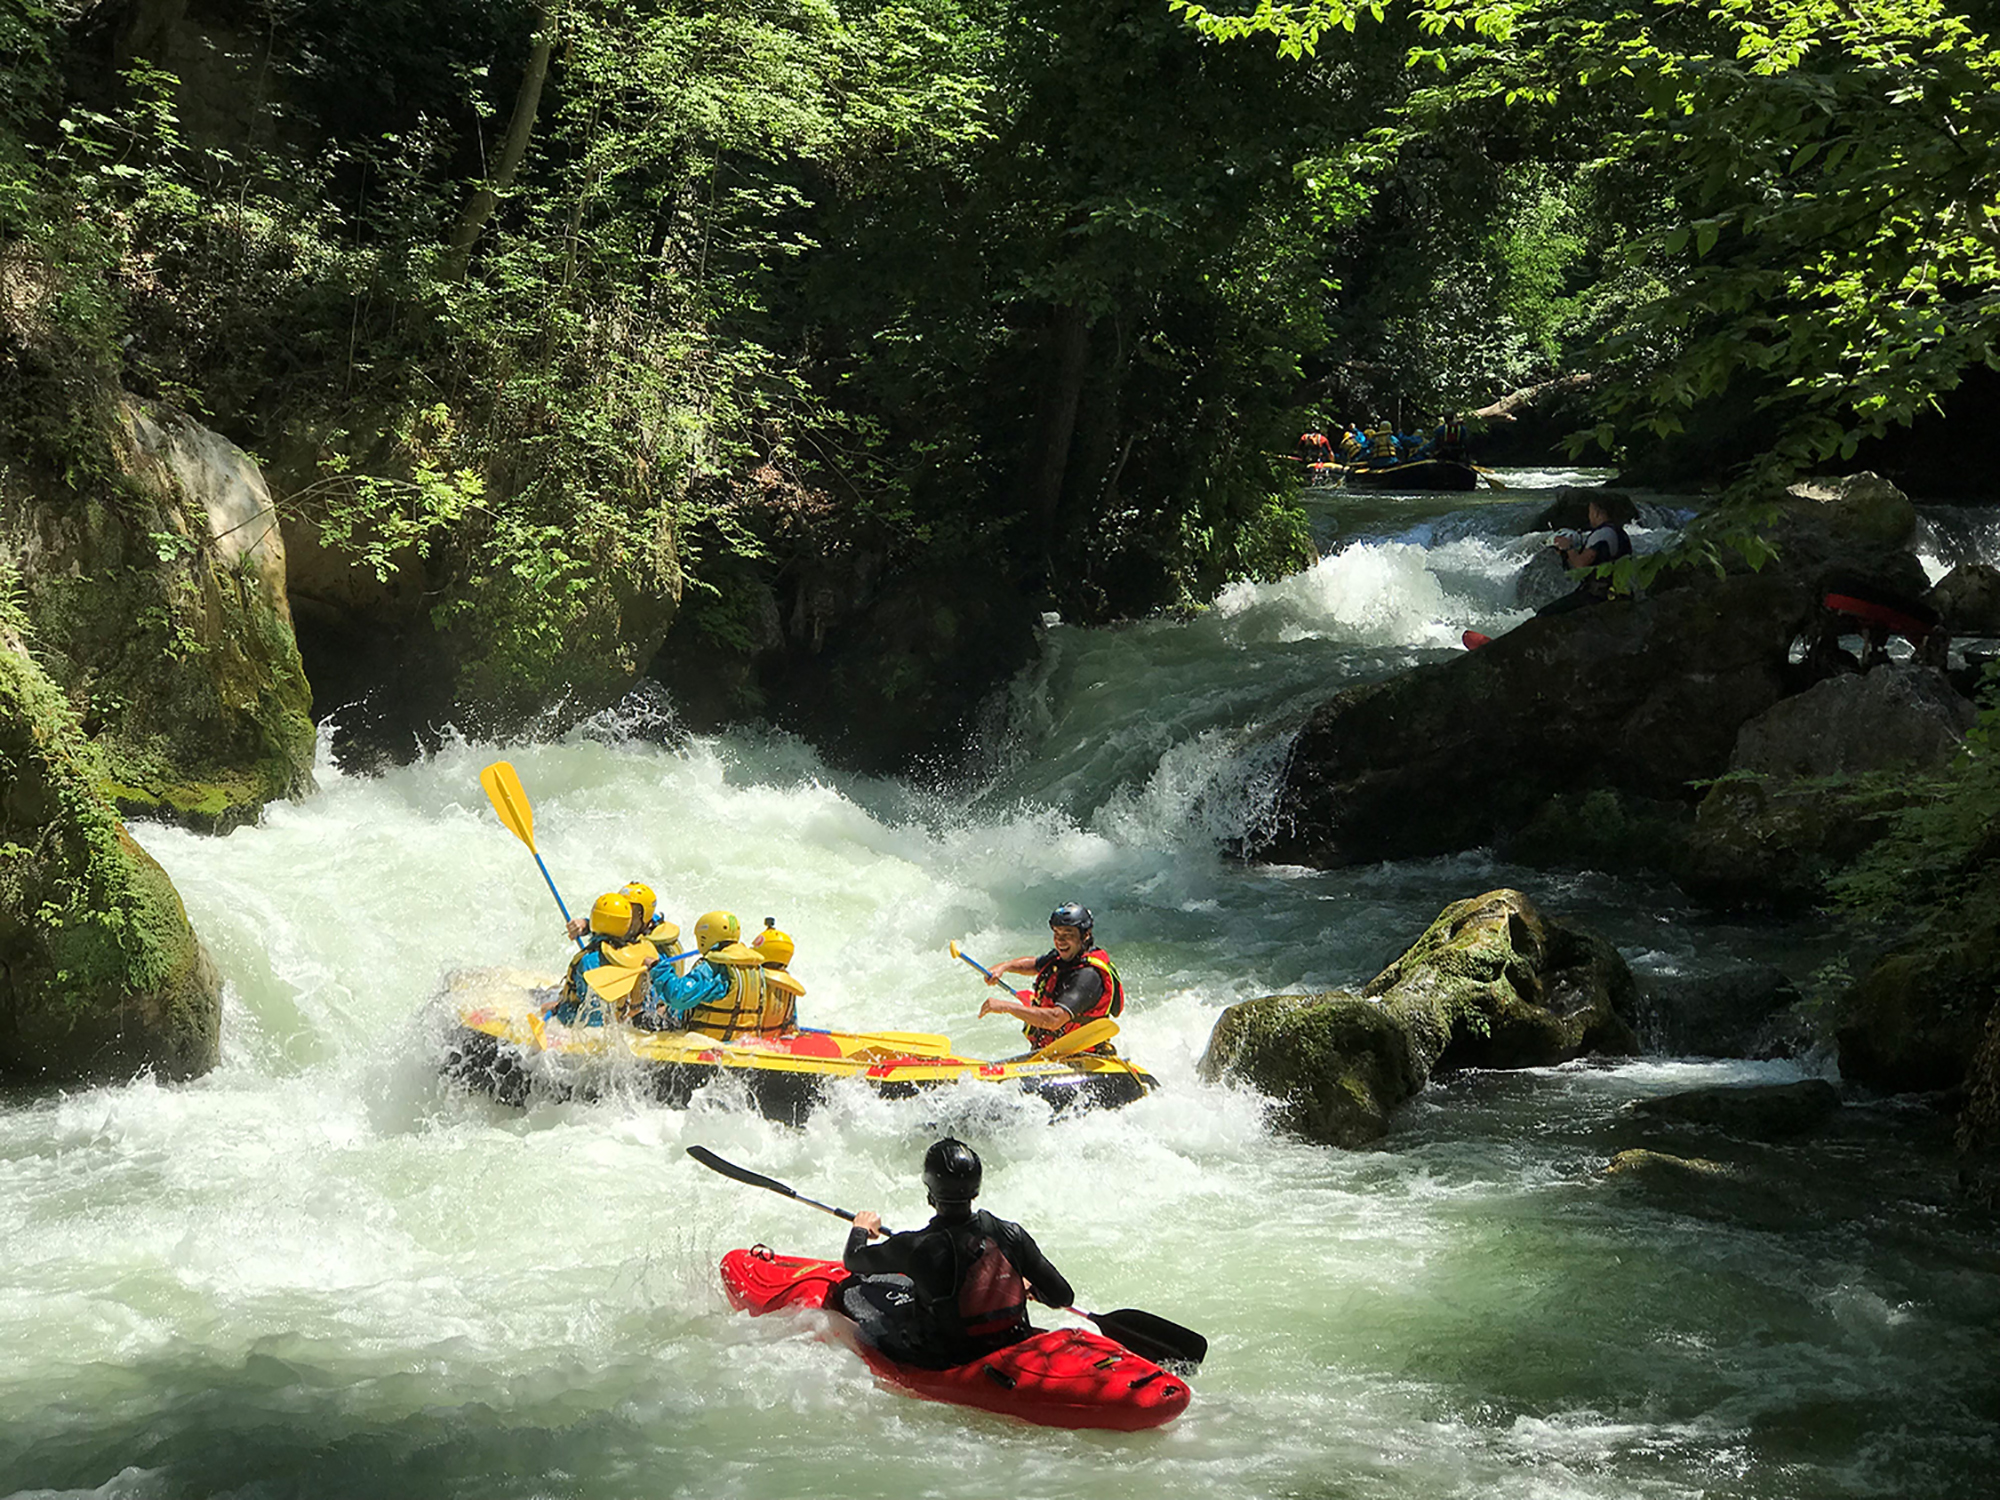  Rafting sport is considered one of the exceptional touristic attractions at Marmore Falls